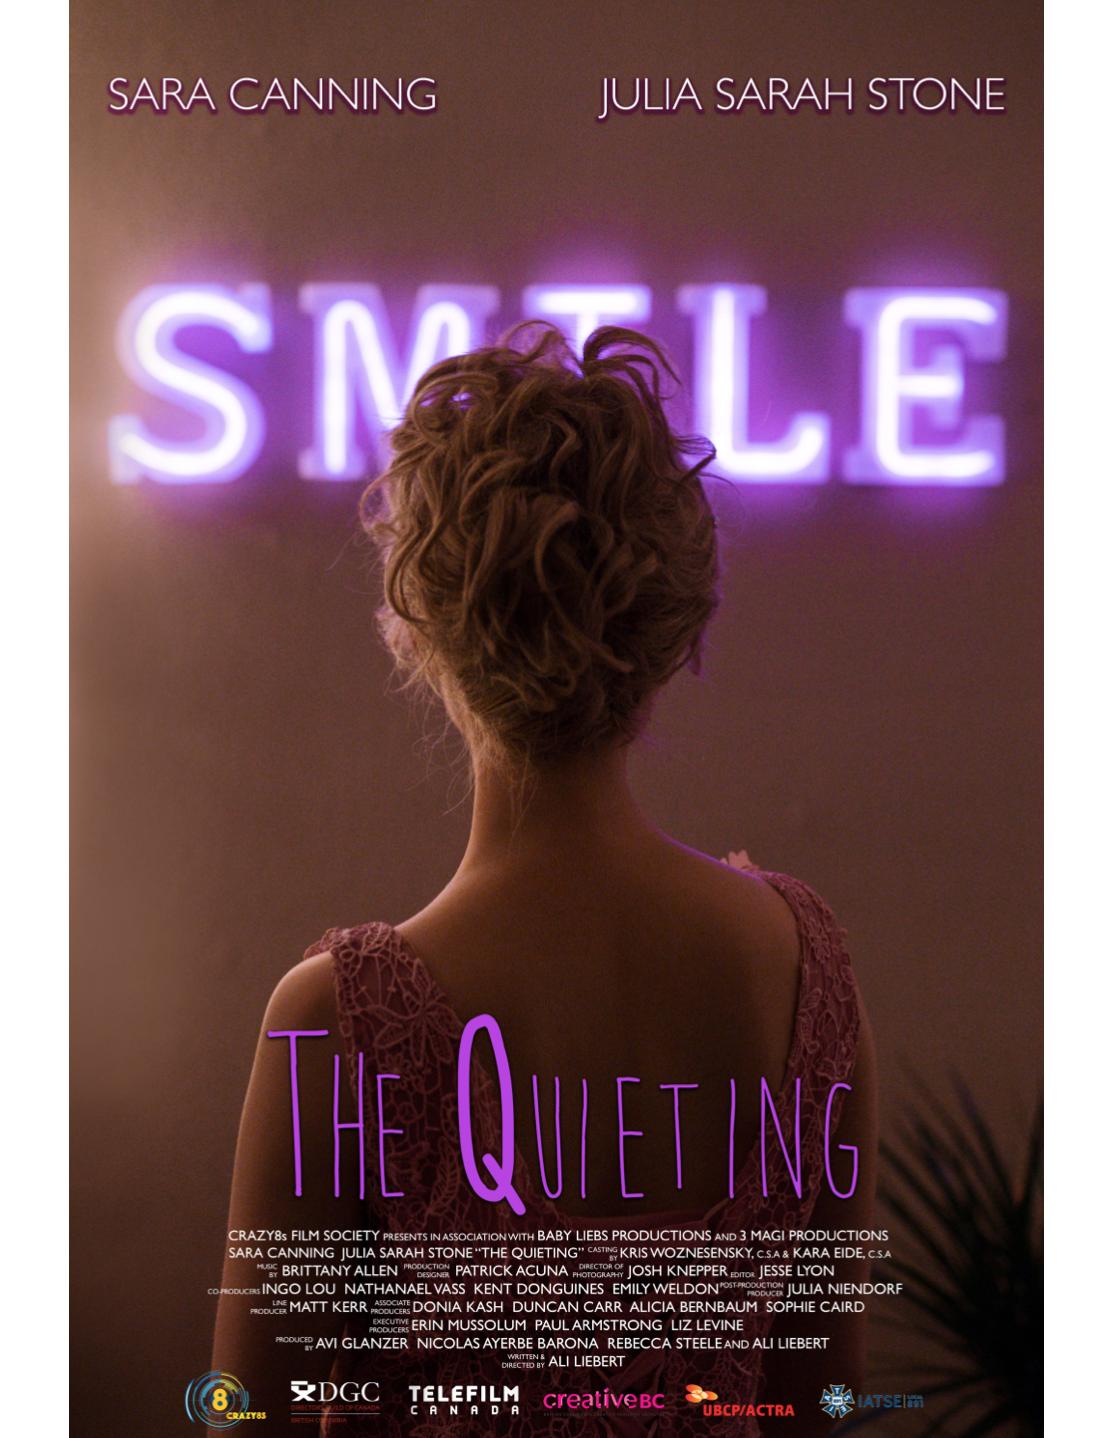 The Quieting (2020)